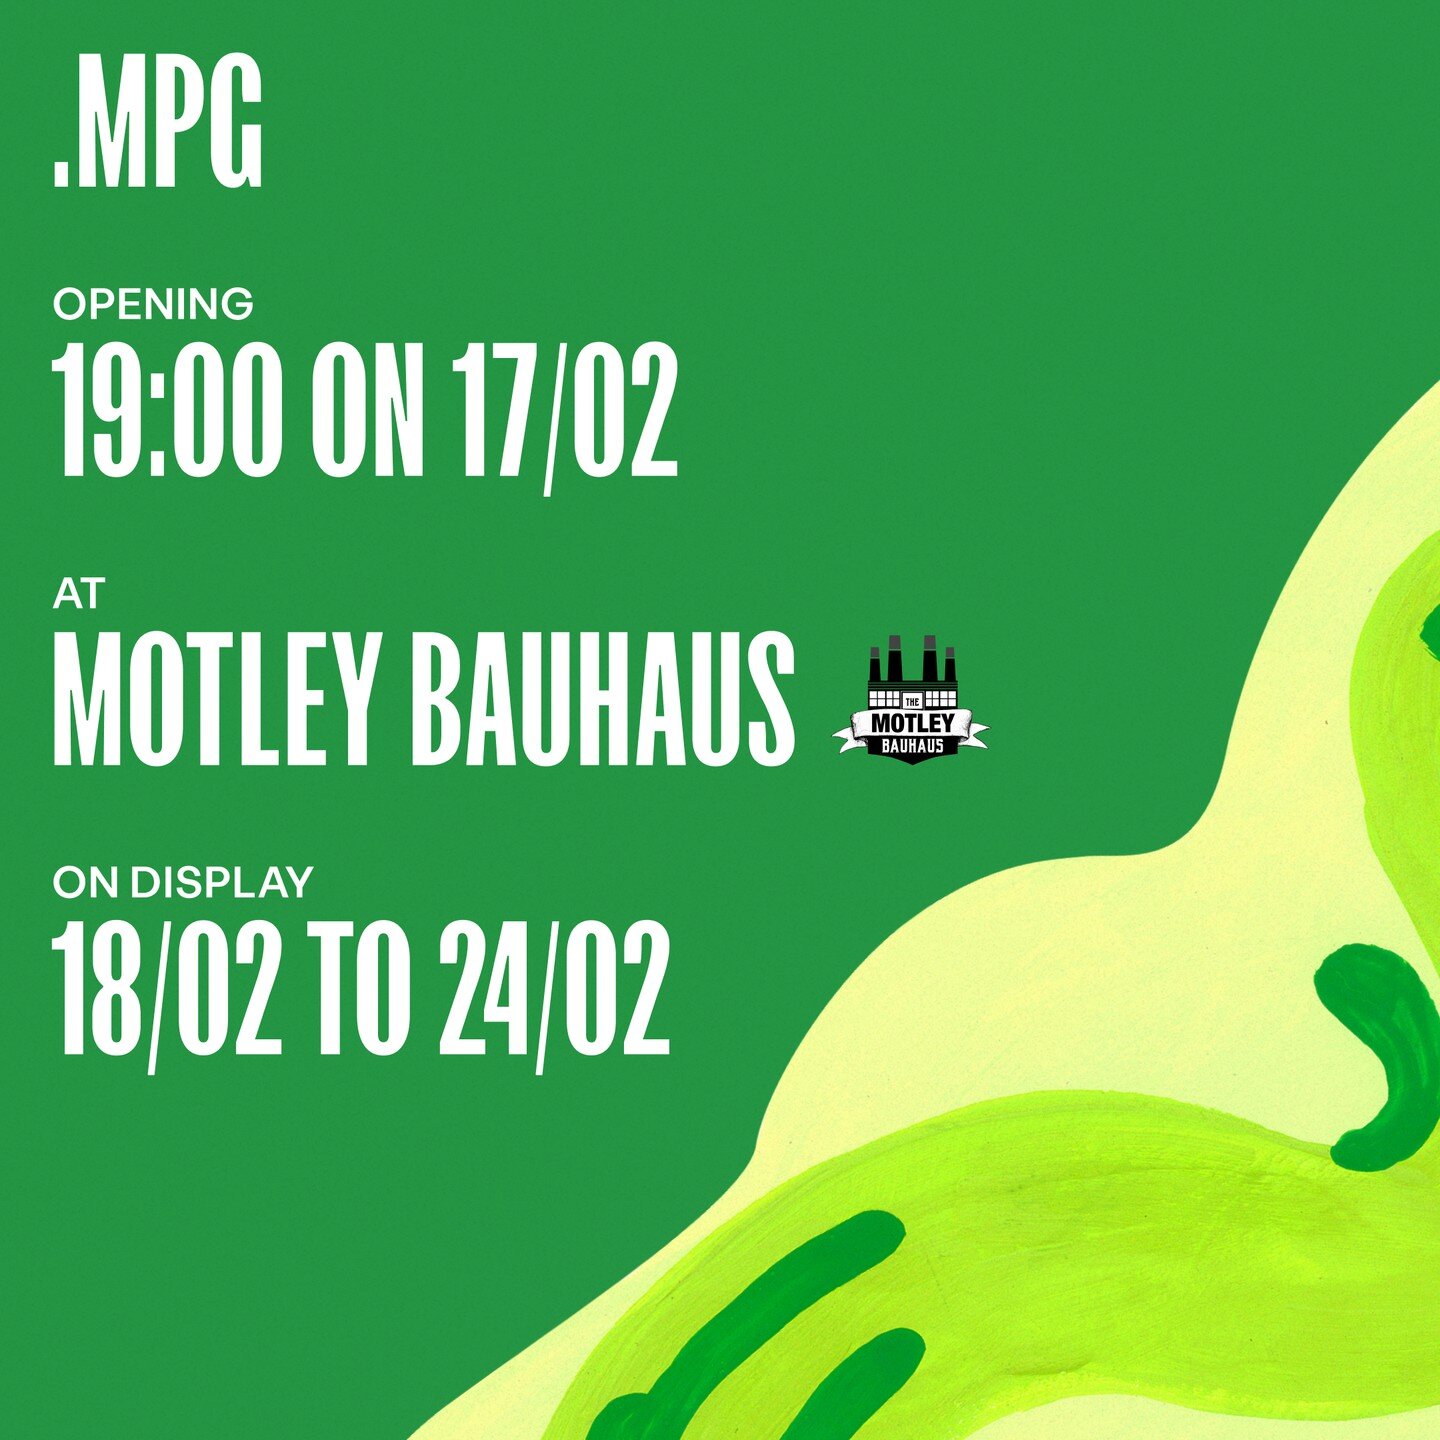 ANNOUNCEMENT!!! 
 
A self-titled first show by the .mpg trio, myself, Luke D. King (@pkingas) and Ravi Vasavan (@movas.xyz) at the @motleybauhaus 
 
Our first show together is an exploration of our coming together, the contrasts and similarities of o